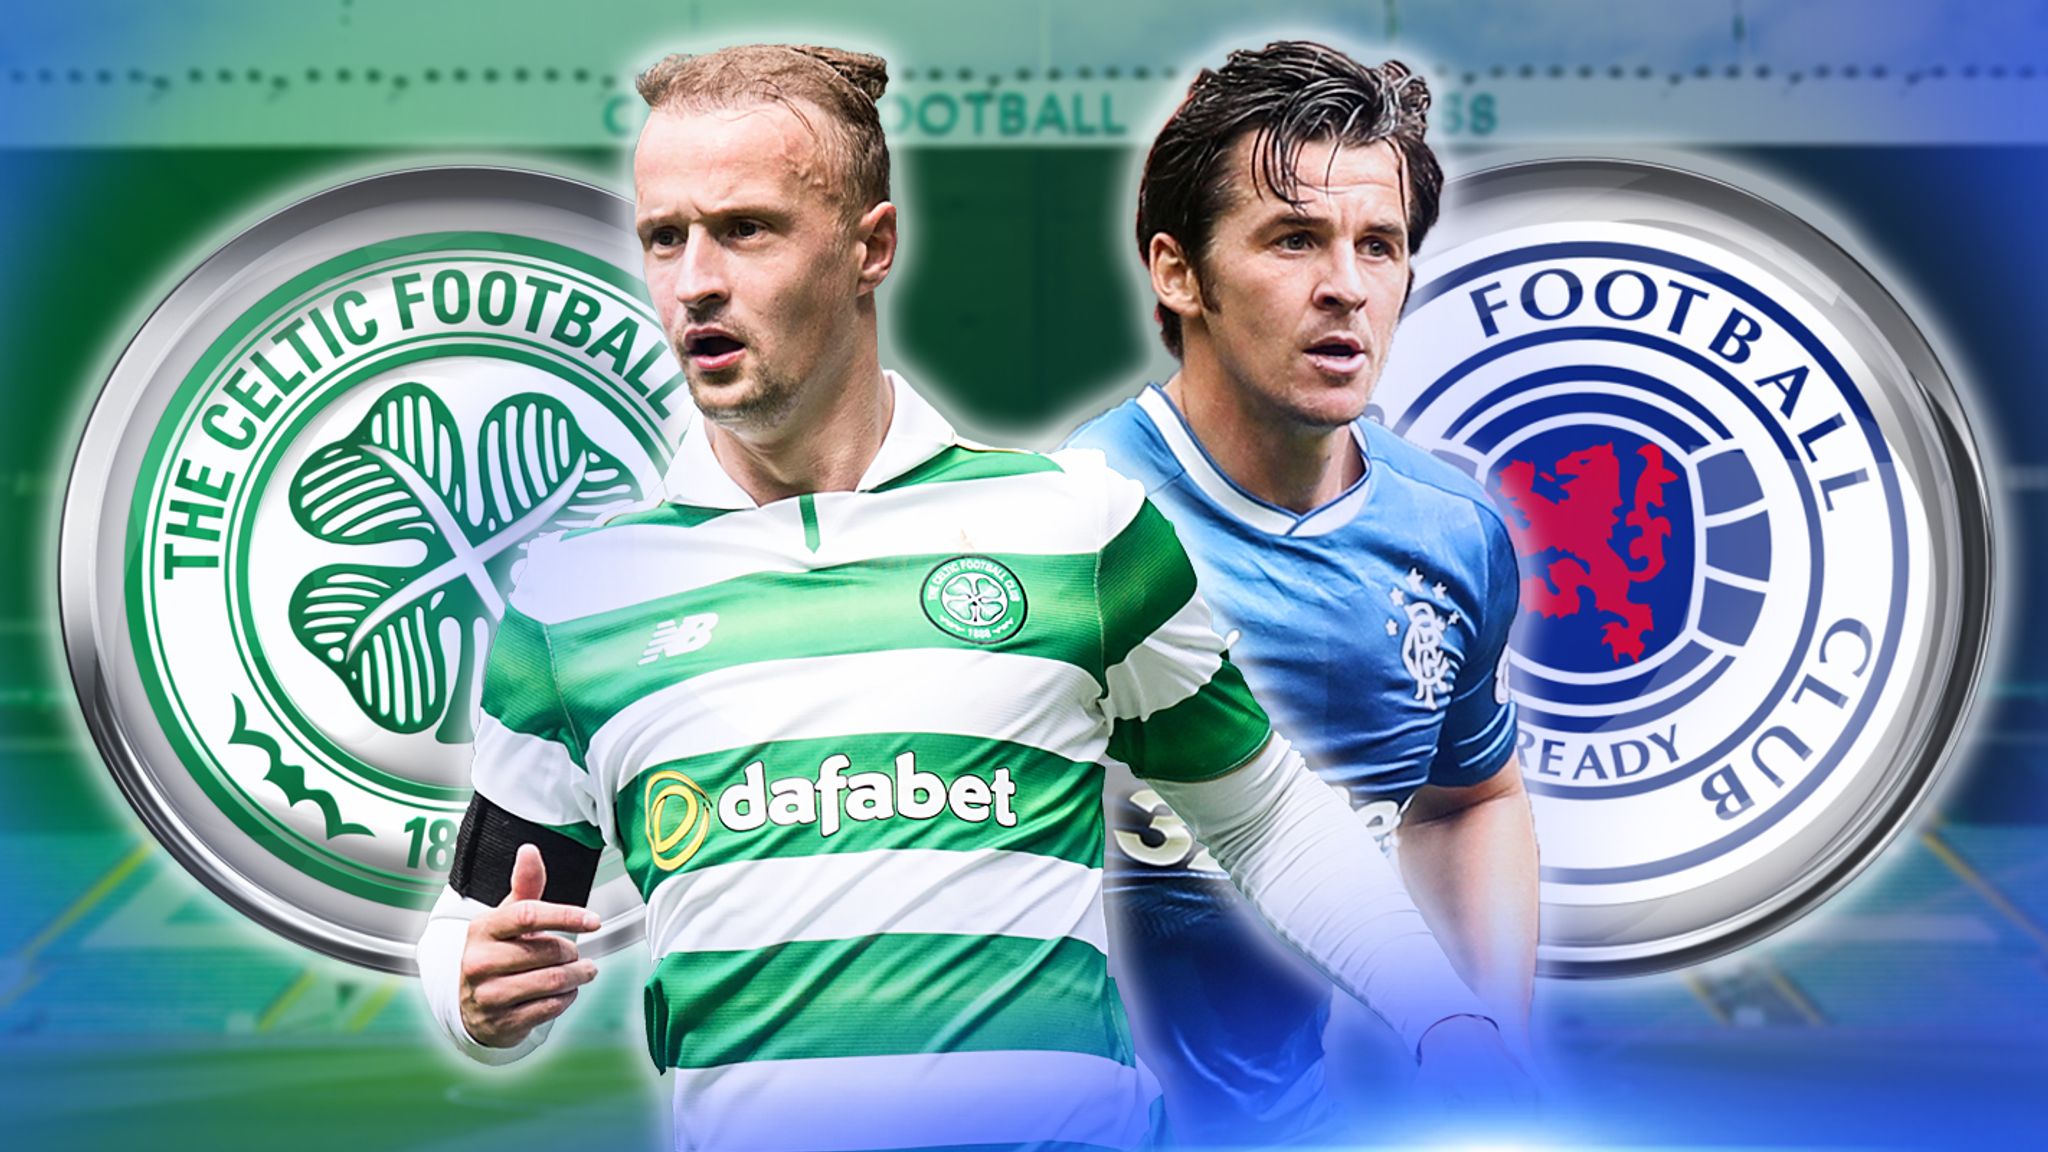 Who has scored most goals ever in Old Firm games and did they play for  Rangers or Celtic?